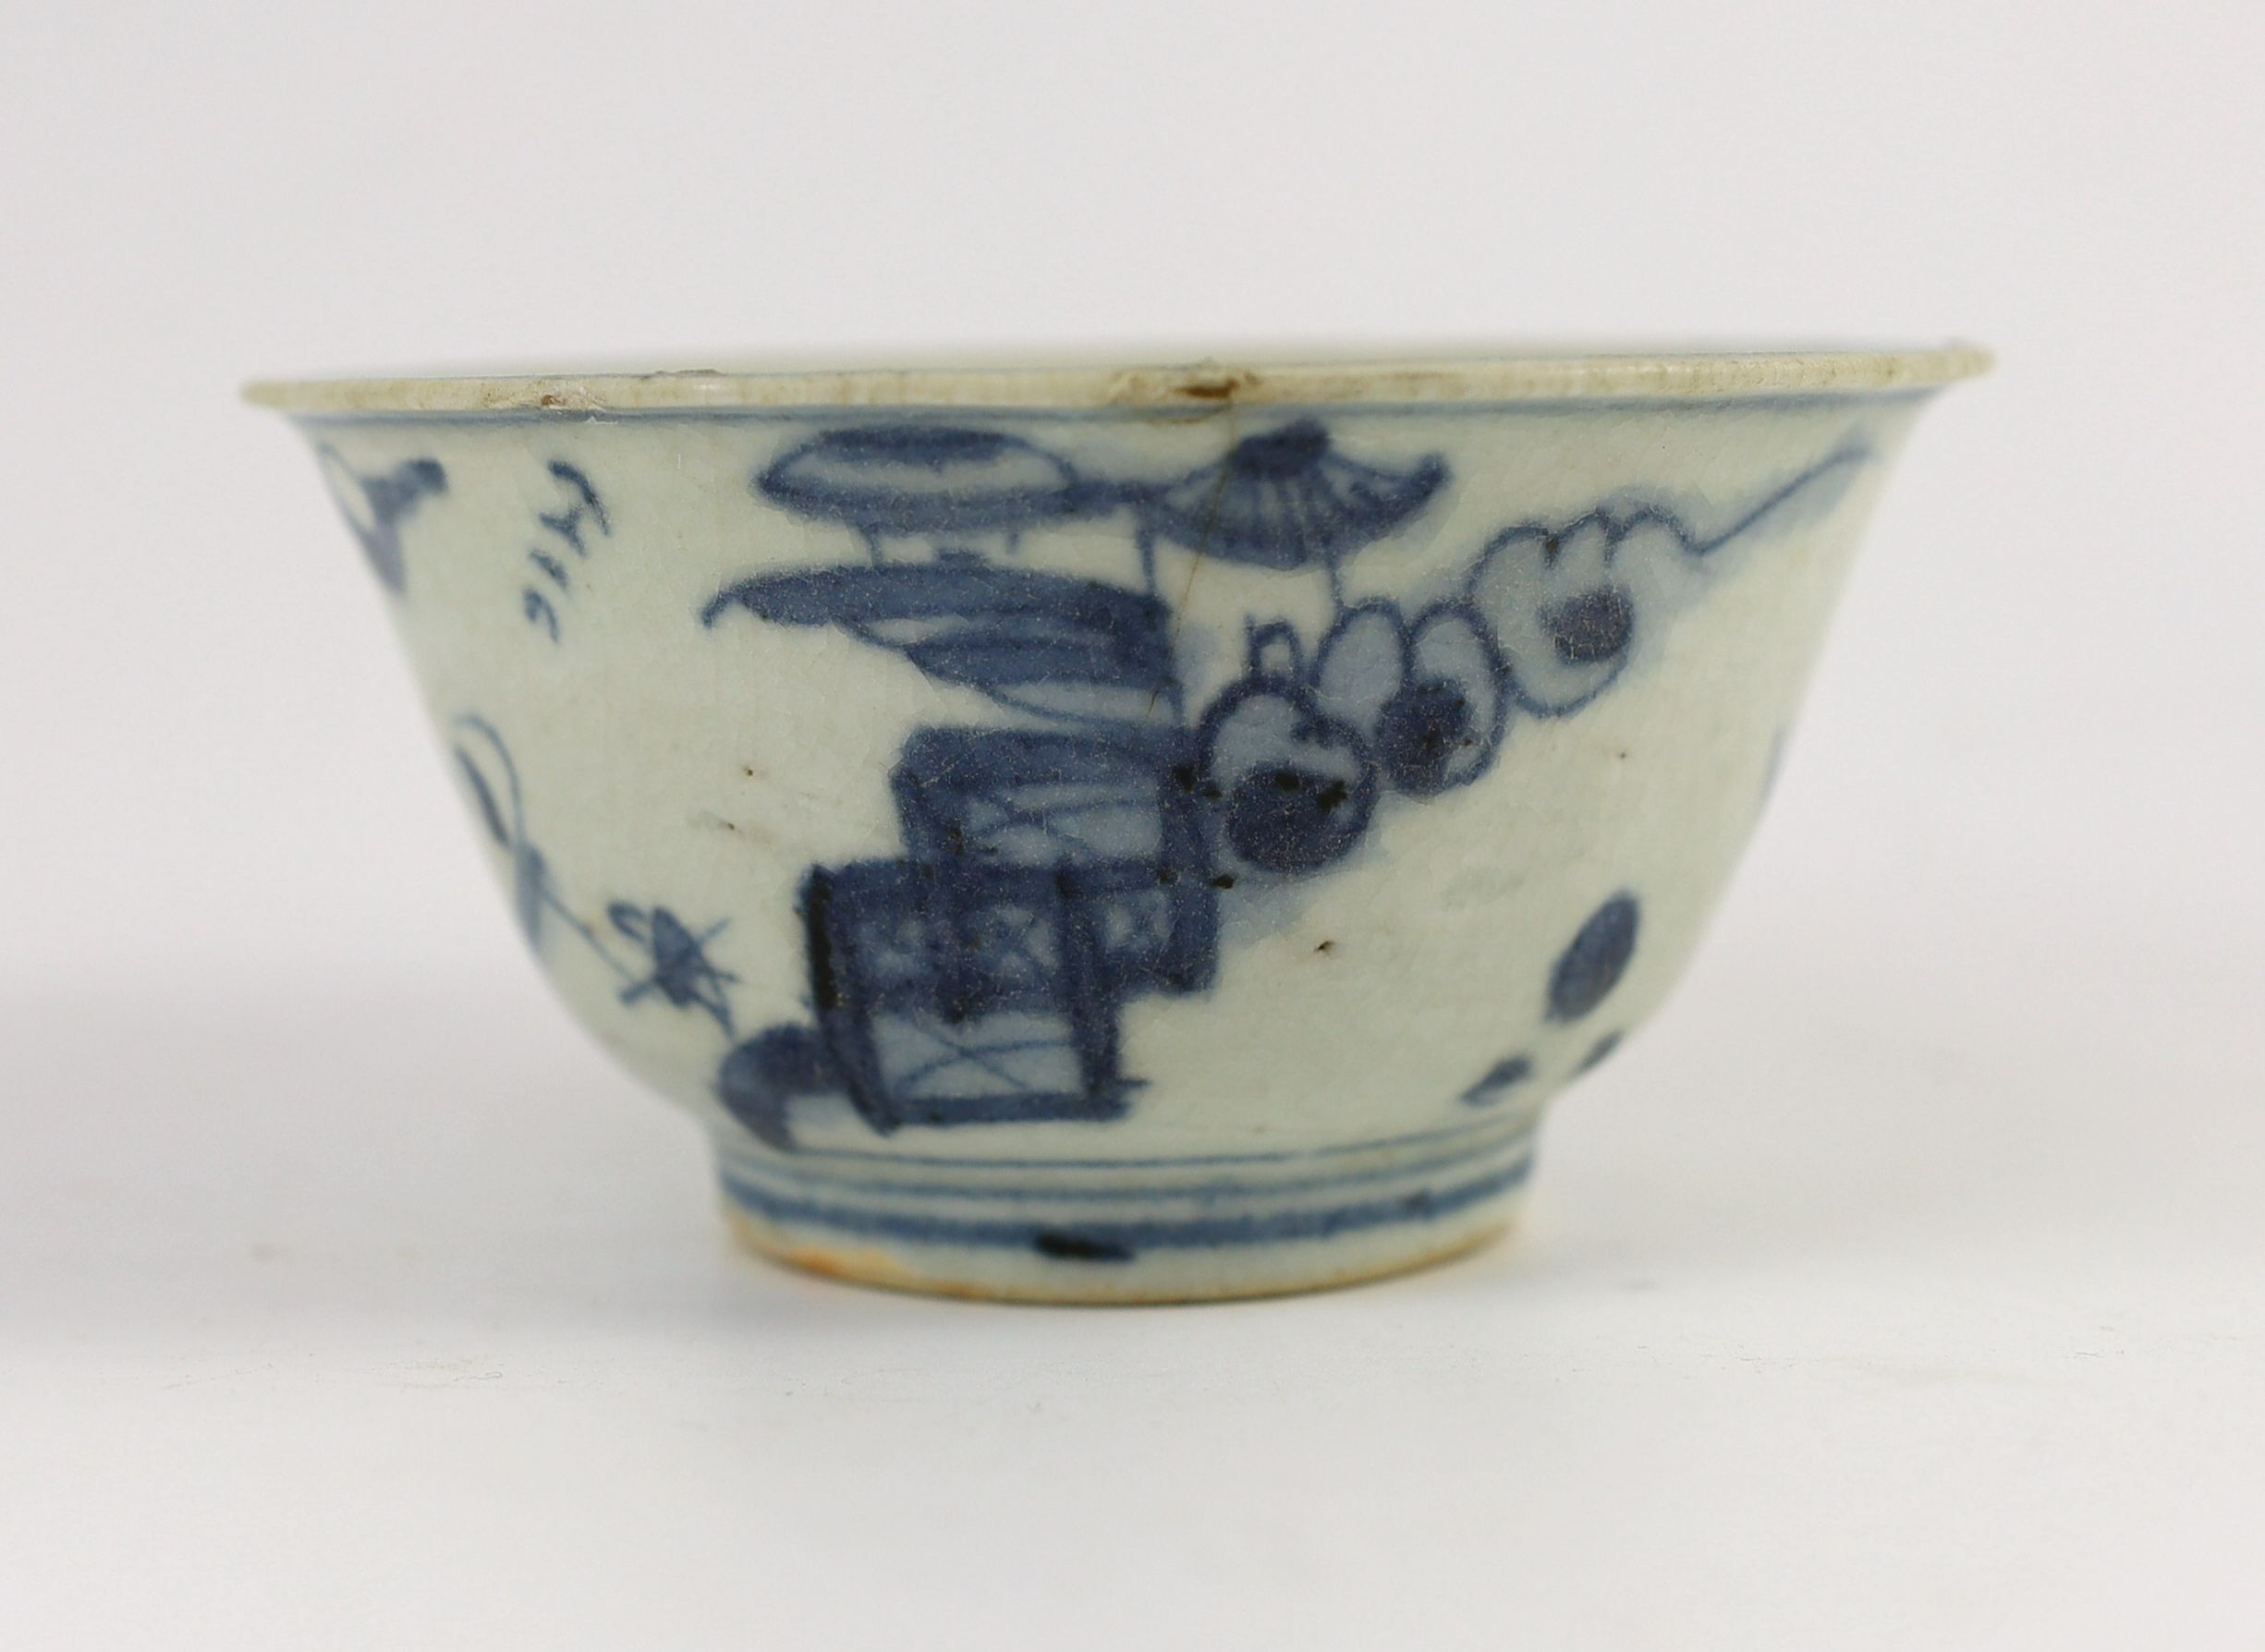 A Chinese Transitional inscribed blue and white bowl, mid 17th century, 12cm diameter, cracked